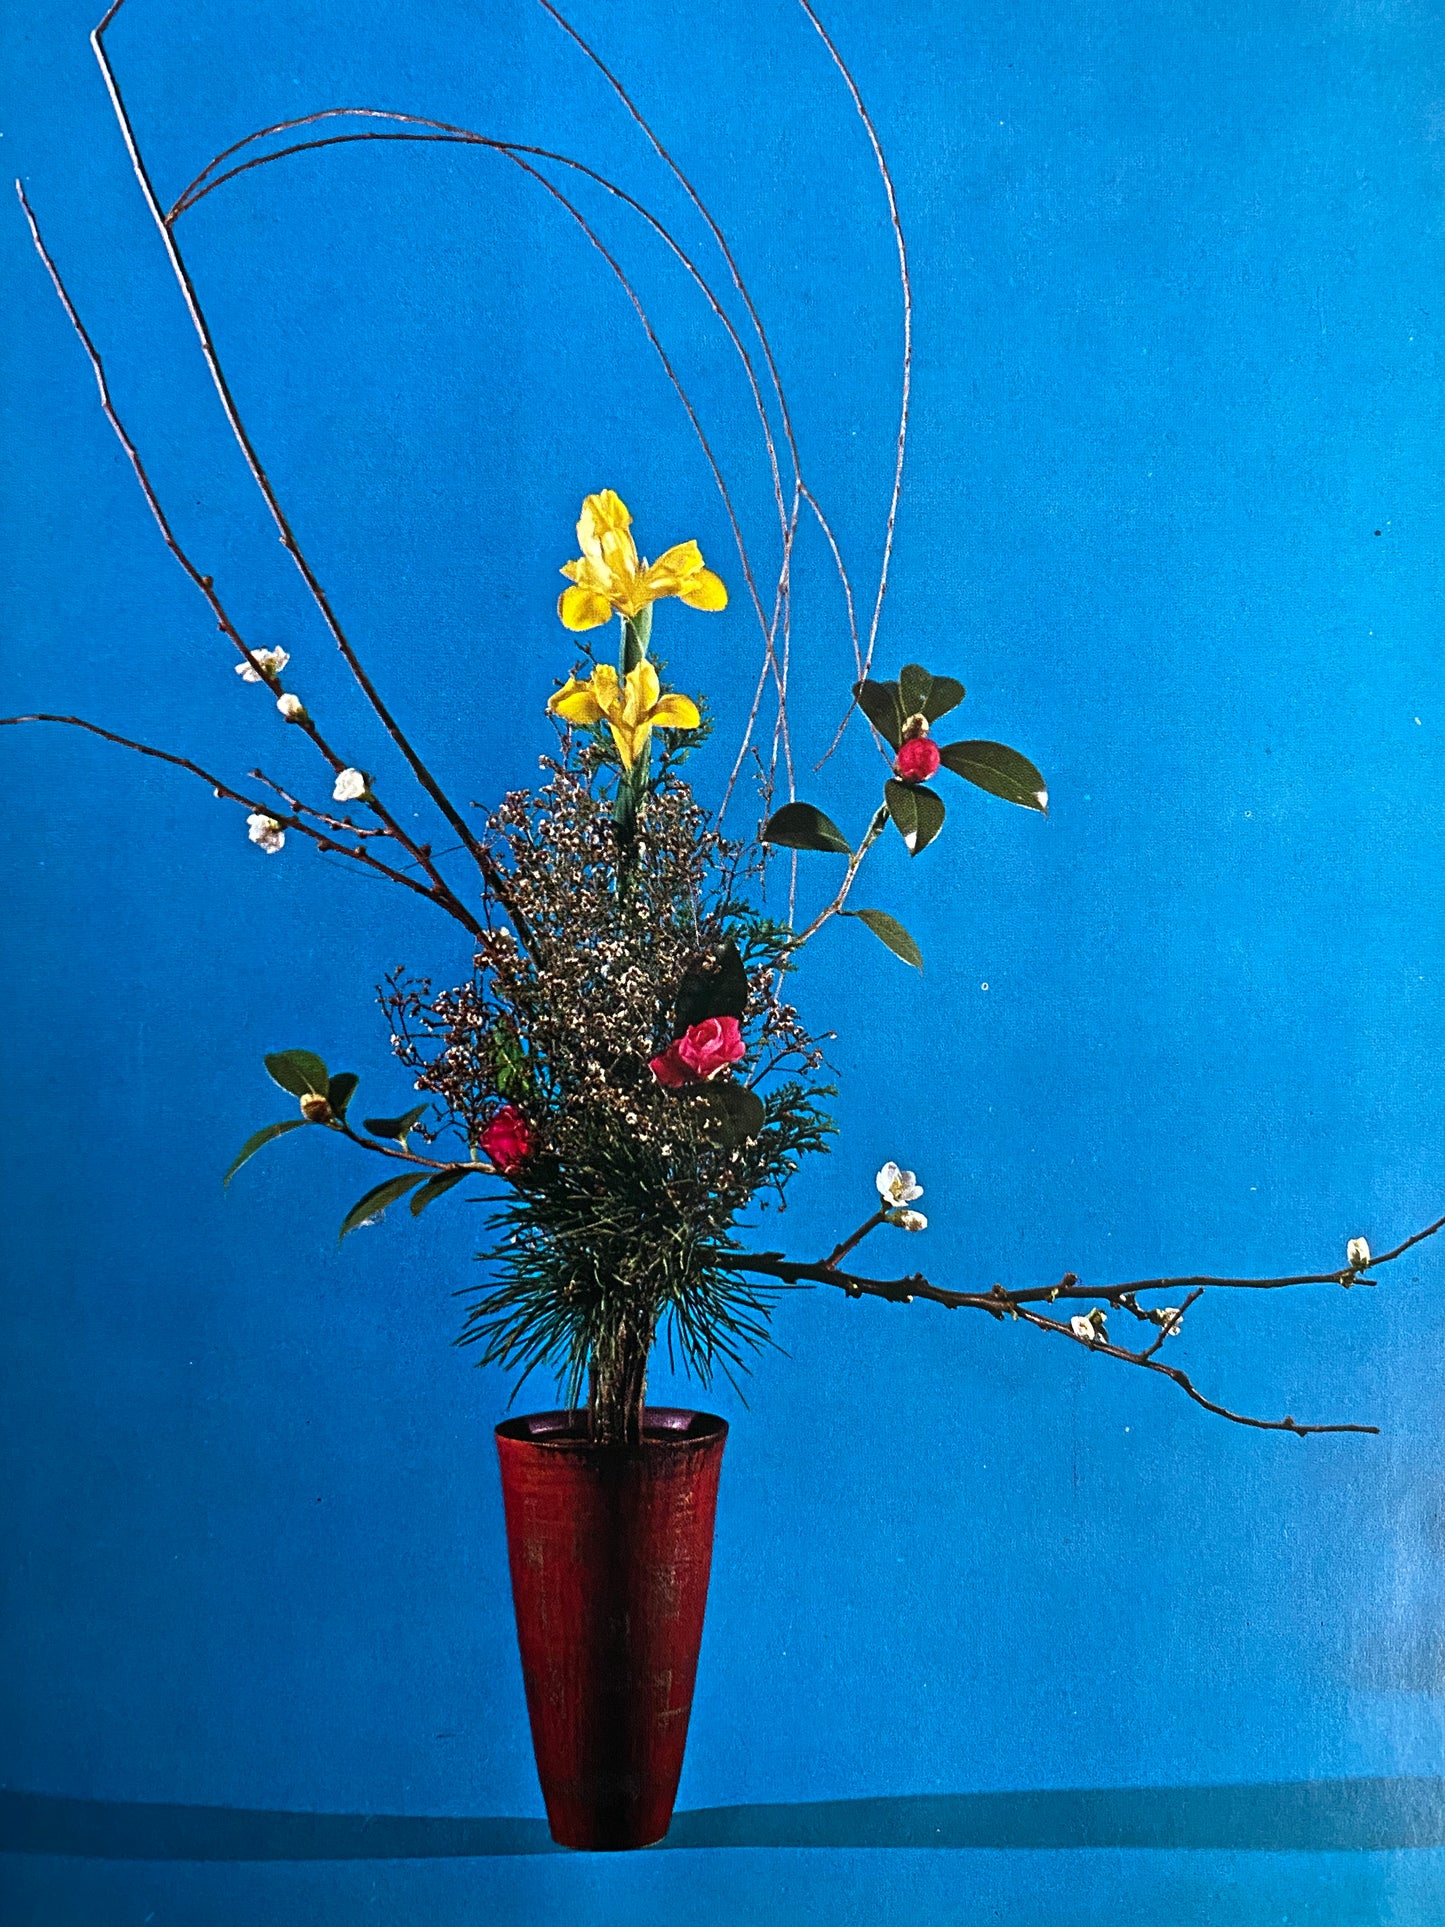 A Guide To Japanese Flower Arrangement (1969)